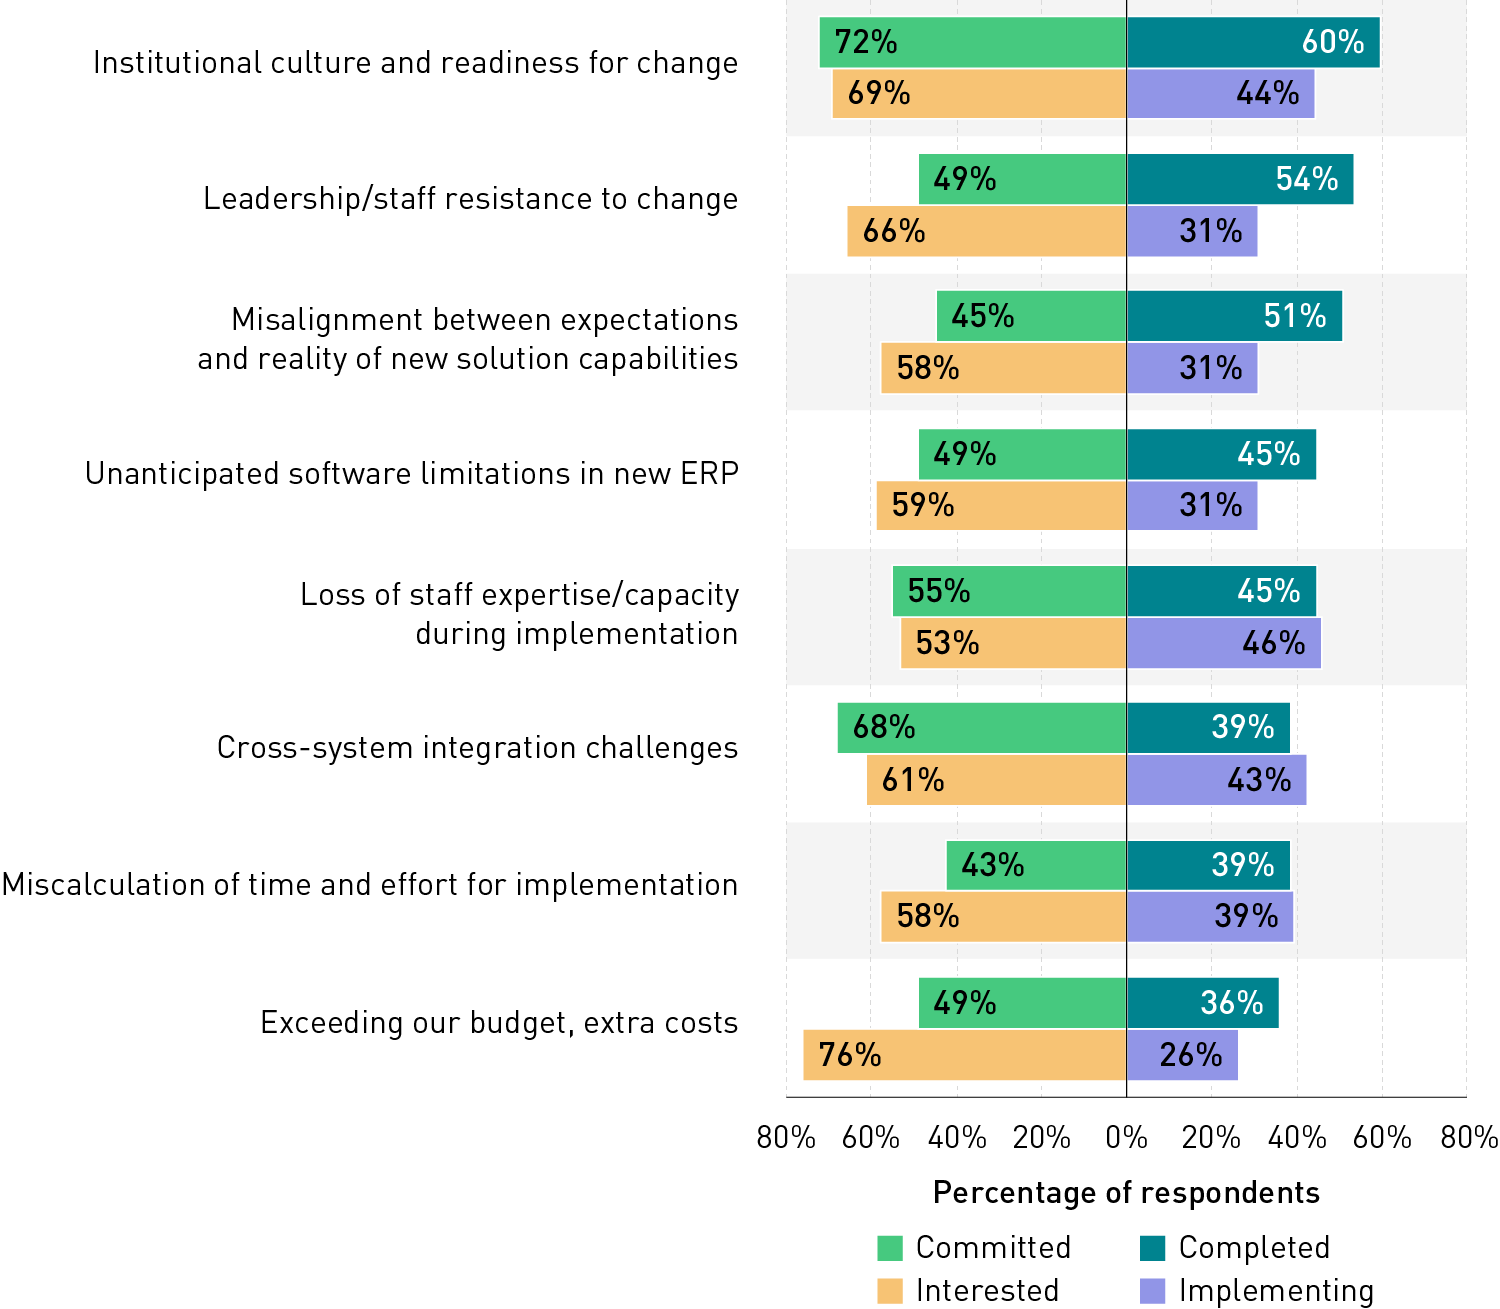 Bar chart showing the percentages of respondents in each group (committed, interested, completed, and implementing) who identified challenges they experienced or anticipate for their ERP implementations. At the top is institutional culture and readiness for change (identified by 72% of committed, 69% of interested, 60% of completed, and 44% of implementing). The other items on the list: leadership/staff resistance to change (49%, 66%, 54%, and 31%); misalignment between expectations and reality of new solution capabilities (45%, 58%, 51%, and 31%); unanticipated software limitations in new ERP (49%, 59%, 45%, and 31%); loss of staff expertise/capacity during implementation (55%, 53%, 45%, and 46%); cross-system integration challenges (68%, 61%, 39%, and 43%); miscalculation of time and effort for implementation (43%, 58%, 39%, and 39%); and exceeding budget, extra costs (49%, 76%, 36%, and 26%). 